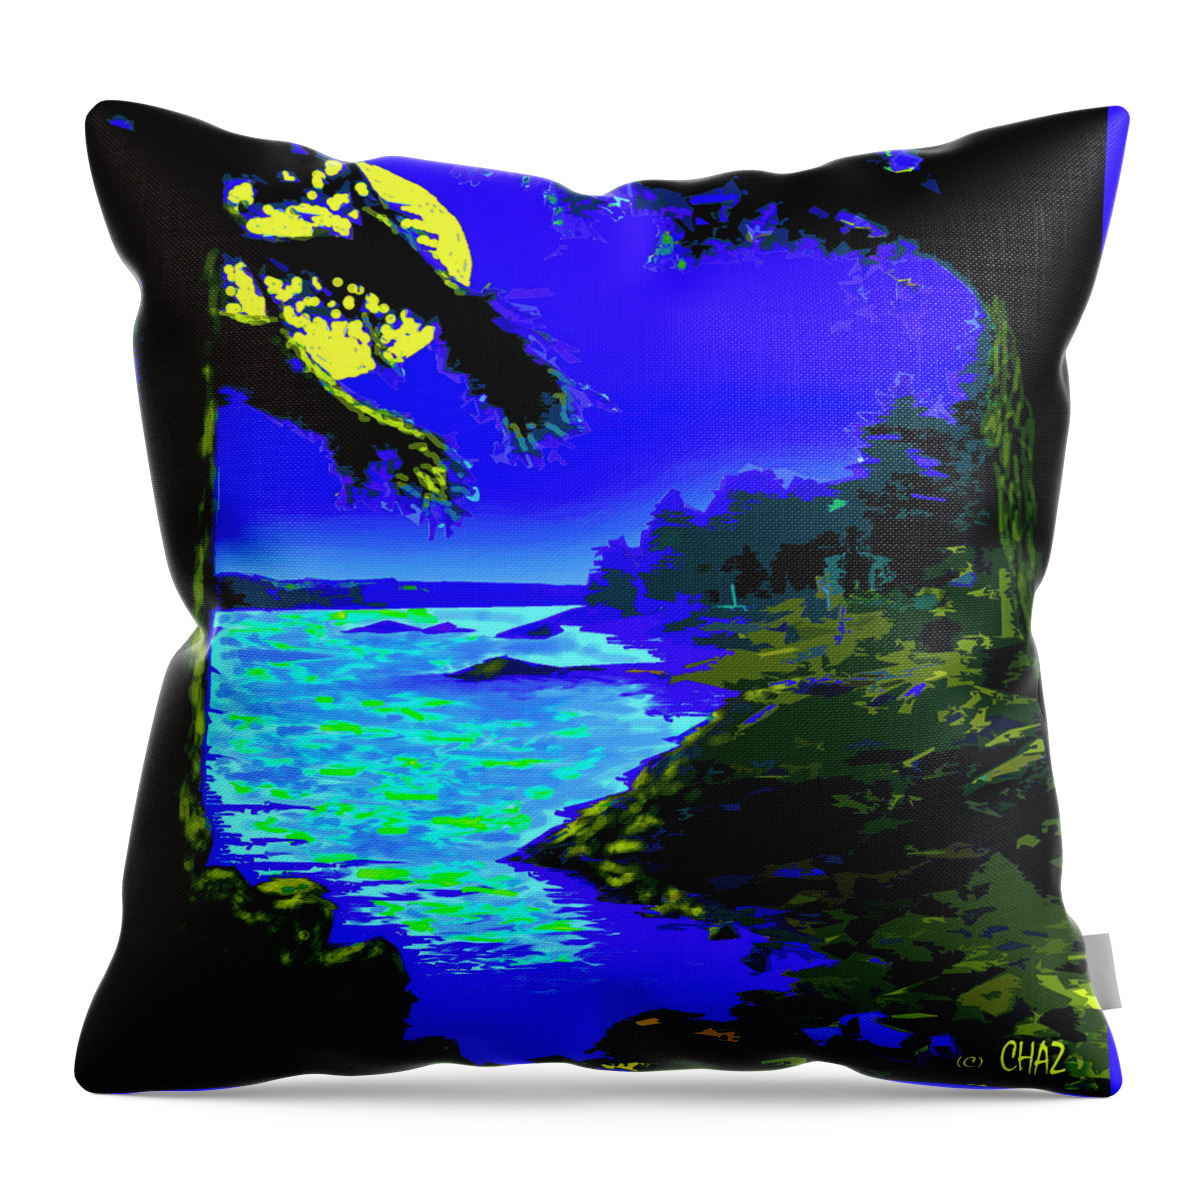 Moon Throw Pillow featuring the painting Autumn Moonrise by CHAZ Daugherty